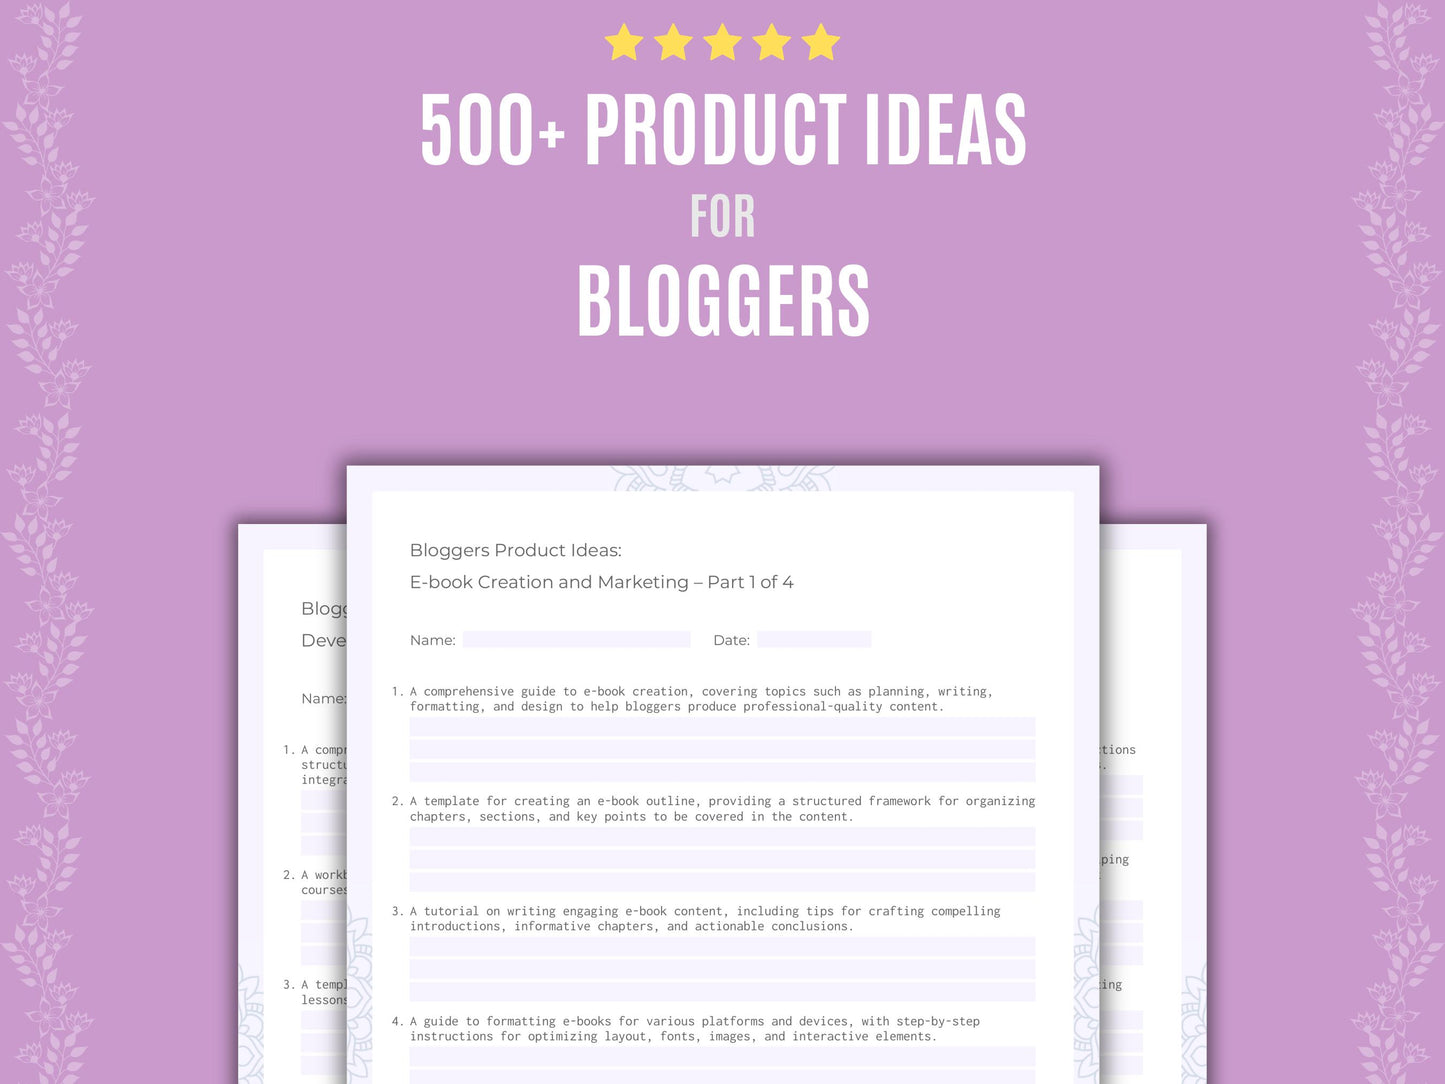 Bloggers Product Ideas Resource